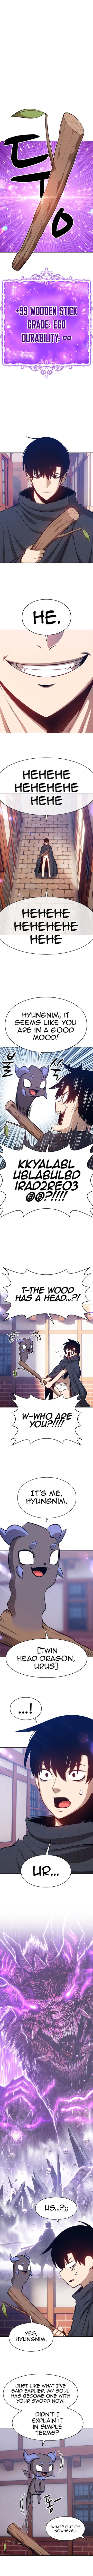 +99 Wooden stick - Chapter 3 Page 3